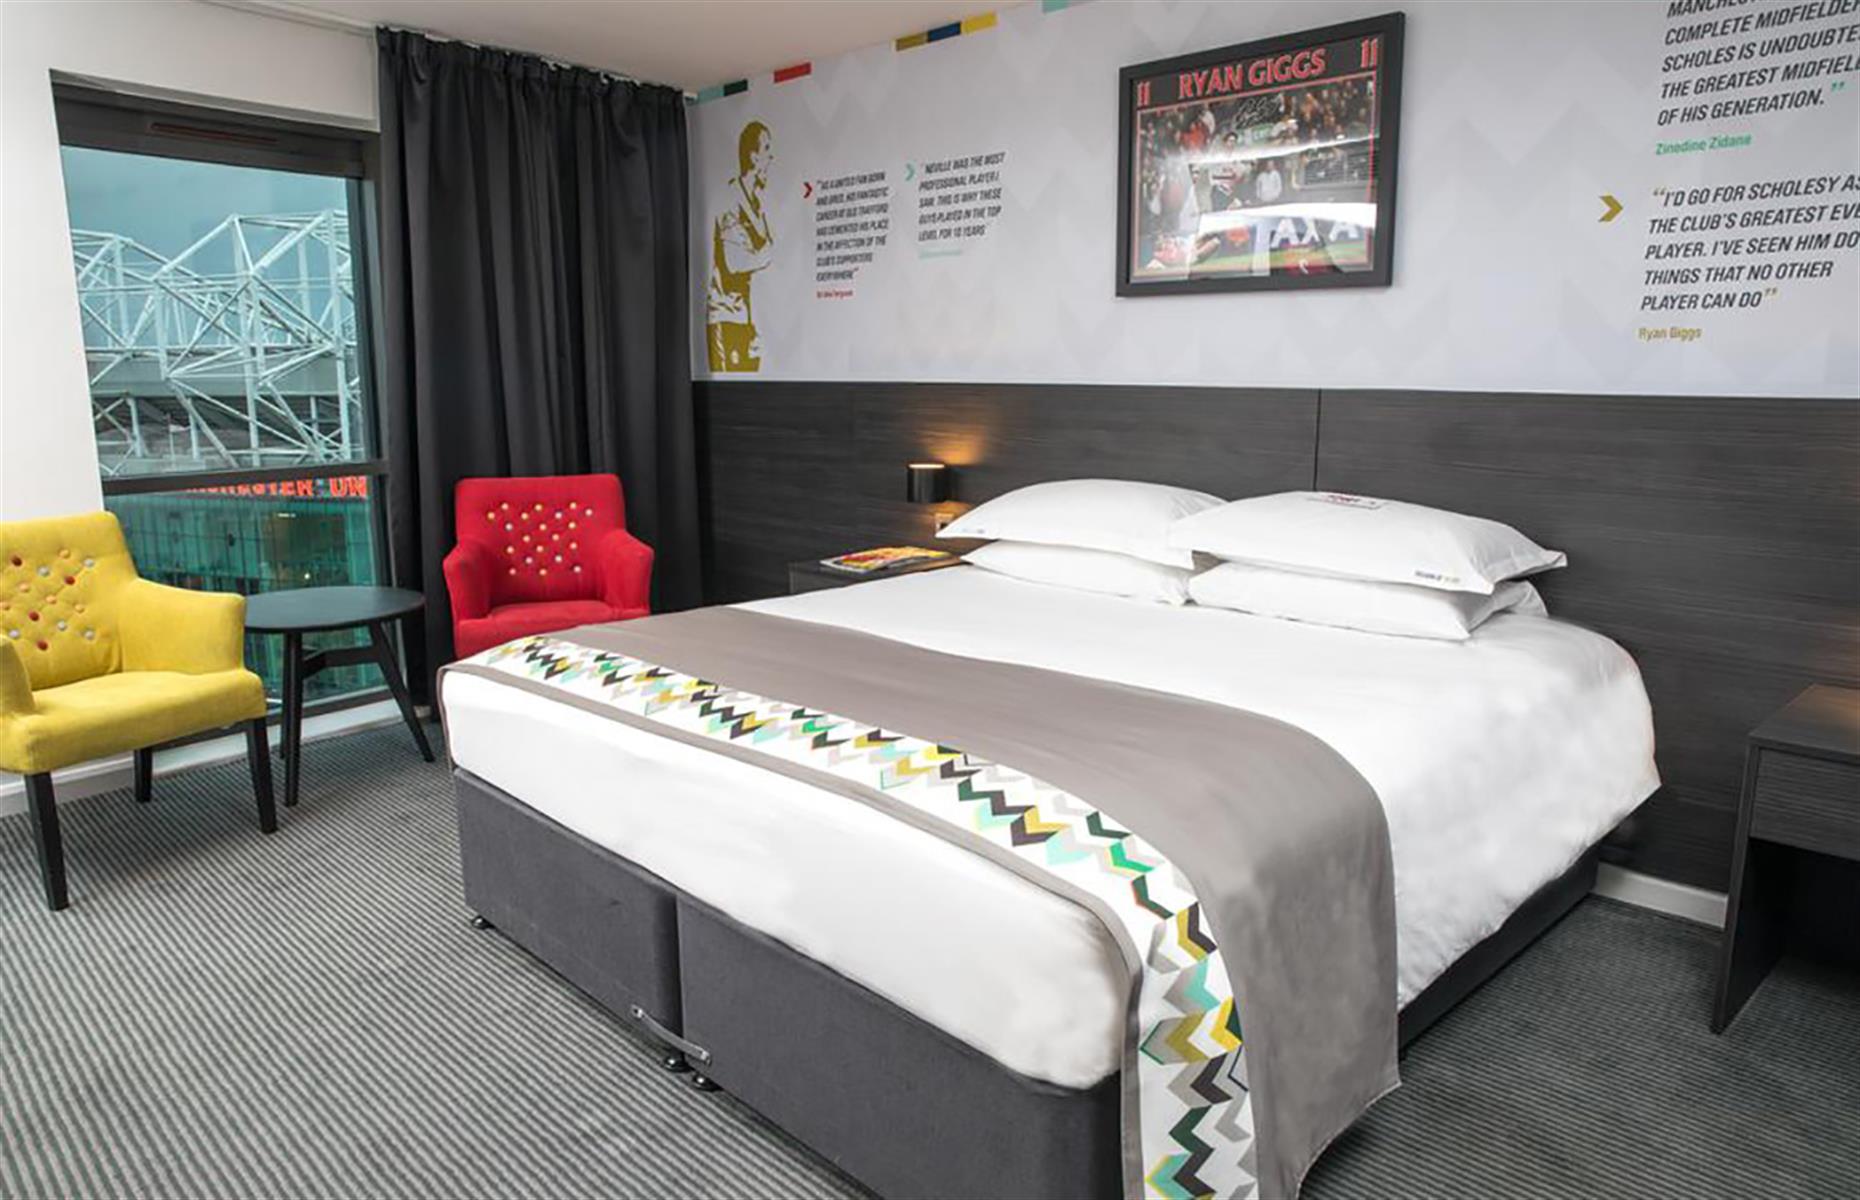 <p>Another excellent choice for soccer fans (maybe not for Manchester City supporters, though), <a href="https://www.booking.com/hotel/gb/football-manchester.en-gb.html" rel="nofollow” target=">Hotel Football</a> is located directly opposite one of the most storied sports grounds in Europe – Old Trafford, home of Manchester United. The hotel is, obviously, soccer-themed and all the rooms feature memorabilia, quotes and pictures of some of the most famous Man United stars, while some rooms overlook the stadium itself. </p>